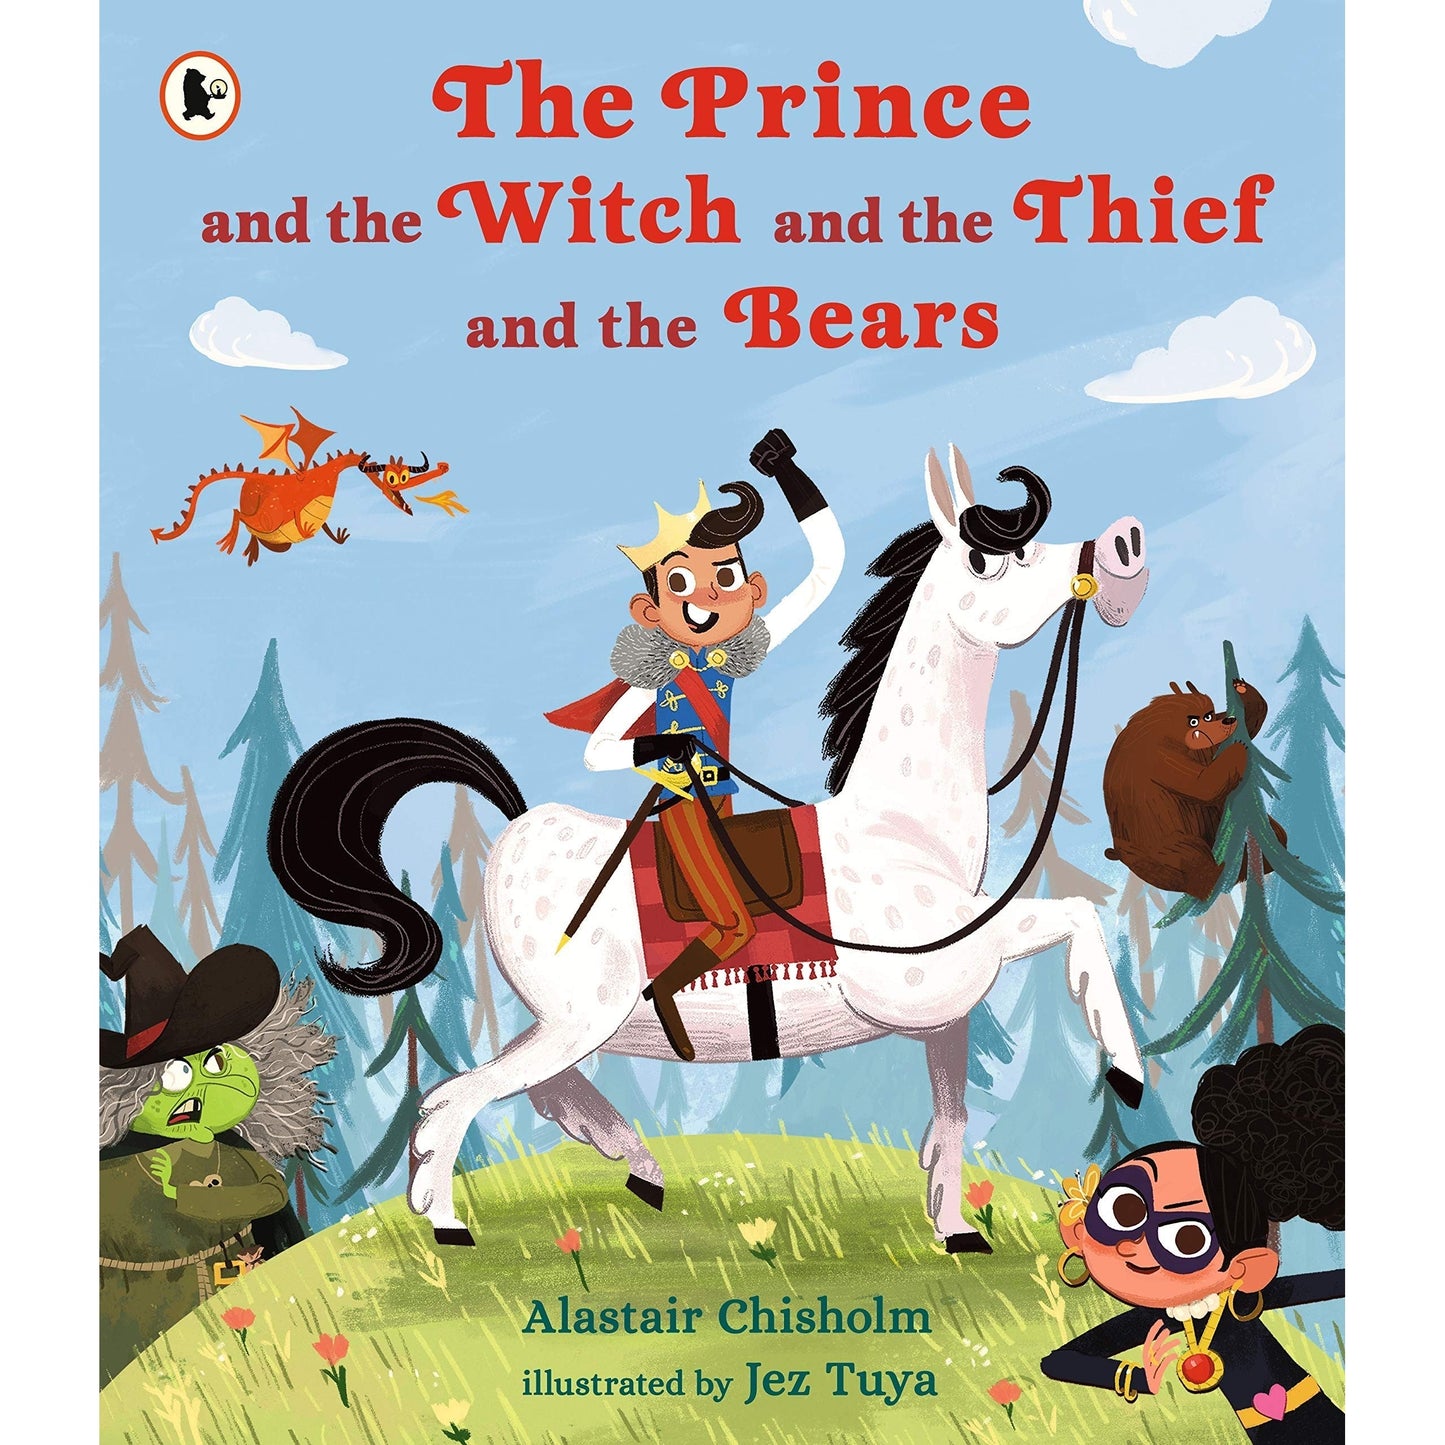 The Prince and the Witch and the Thief and the Bears - Alastair Chisholm & Jez Tuya